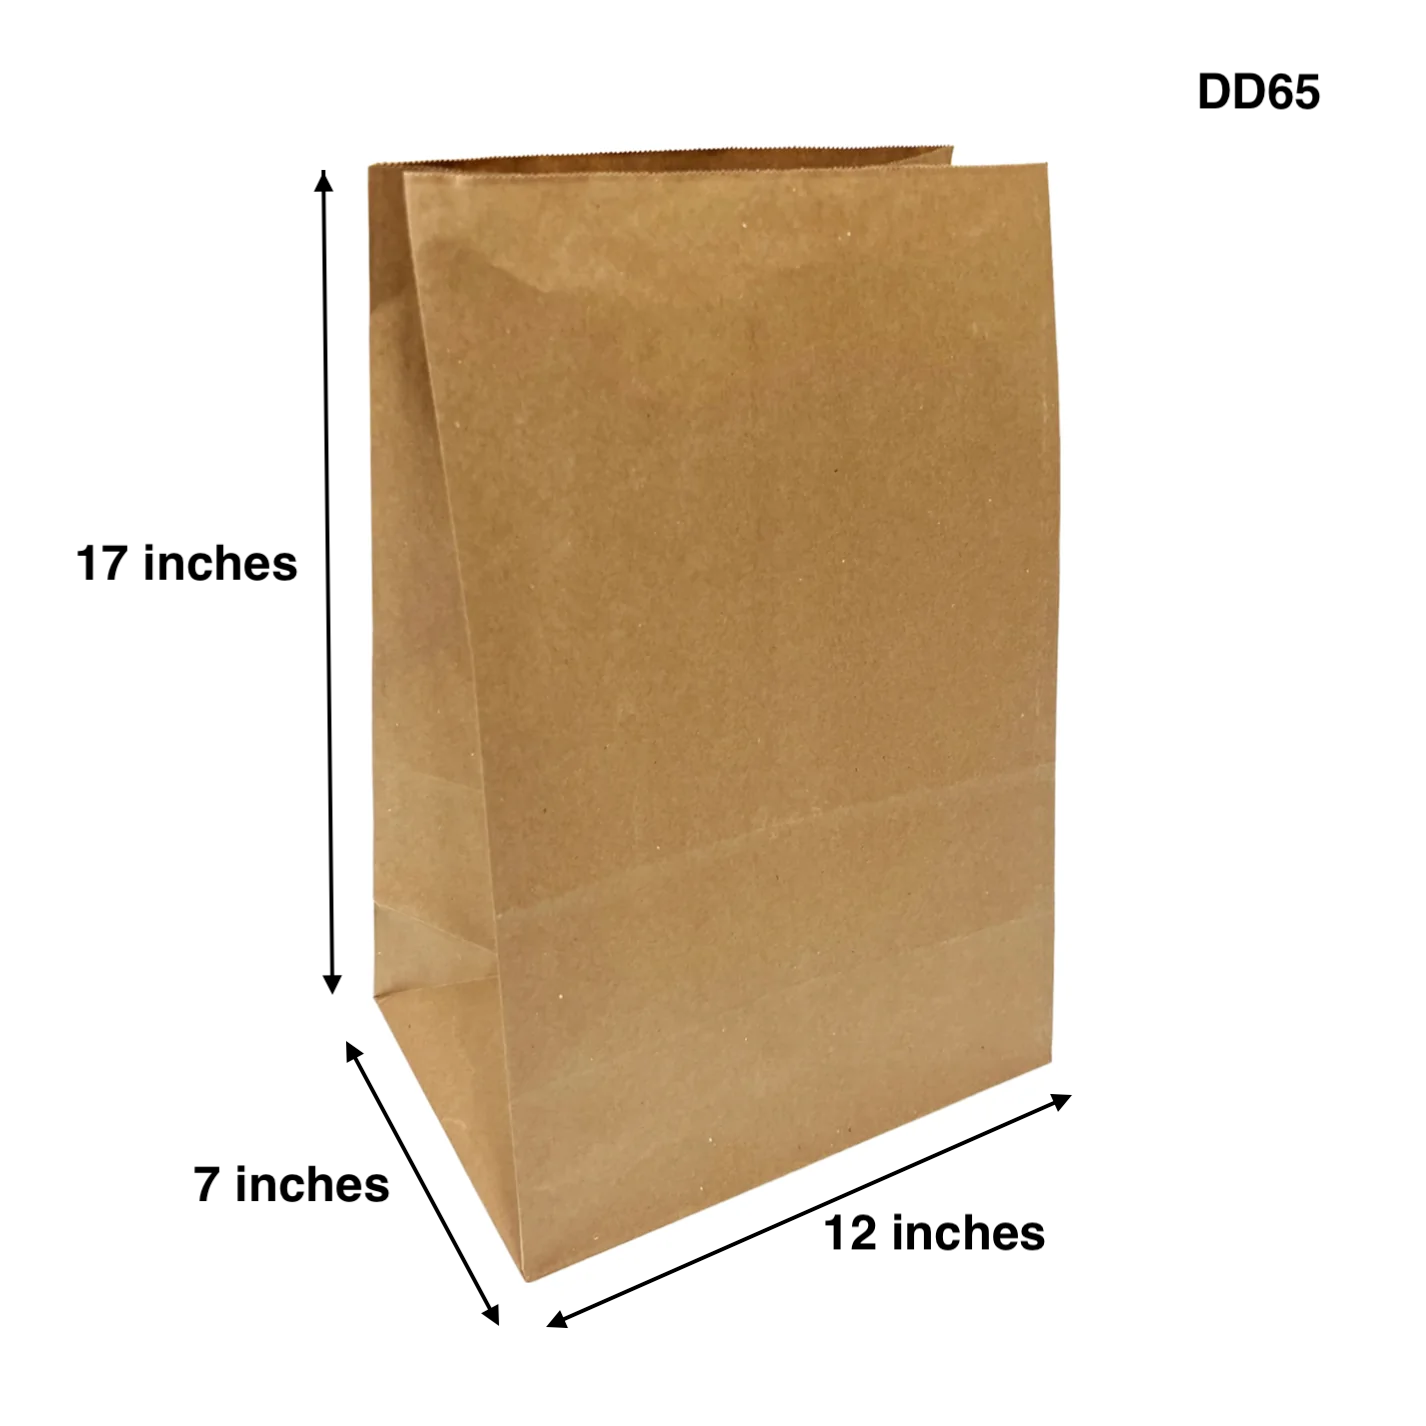 300pcs DD65 Grocery Bags 12x7x17 inches; $0.12/pc